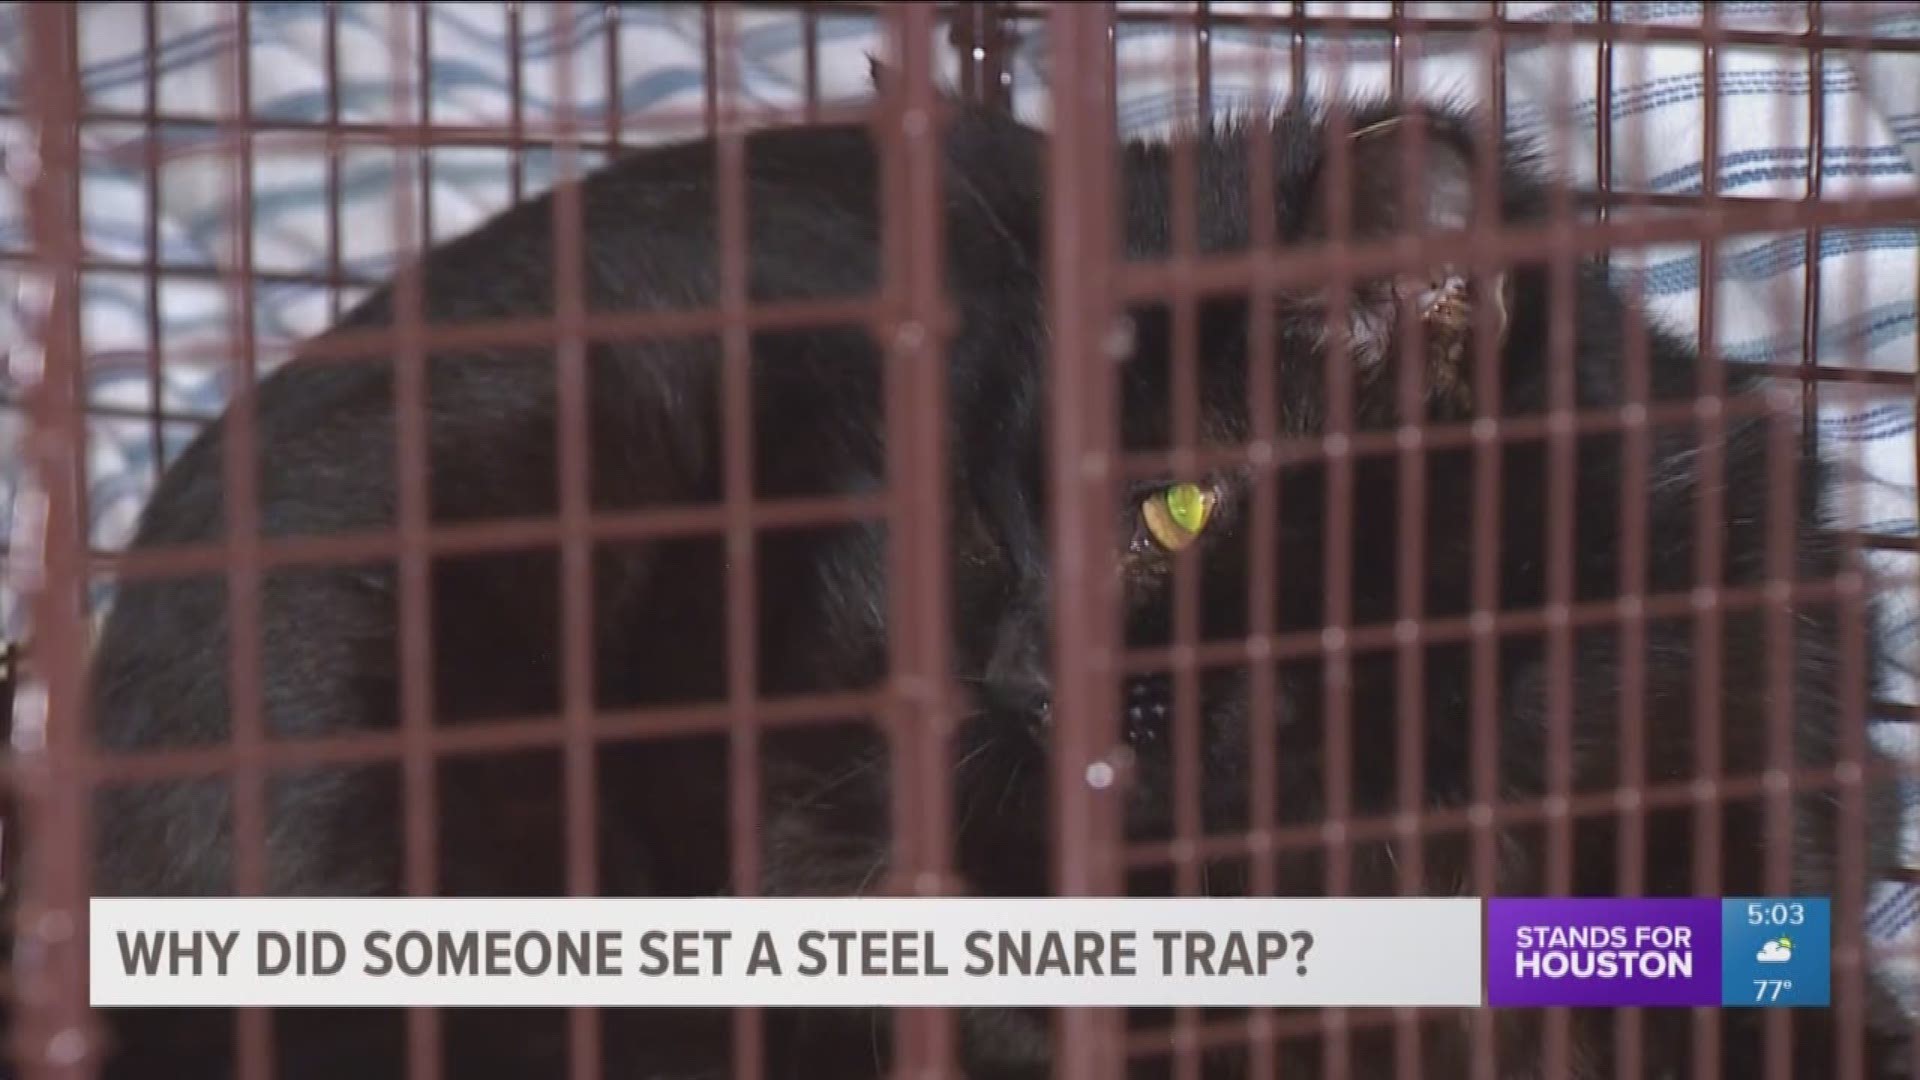 Members of a local animal rescue group are outraged after a cat was found caught in a steel snare trap in the Heights. The Friends For Life rescue organization saved the cat but they want to know who set the "inhumane" trap.